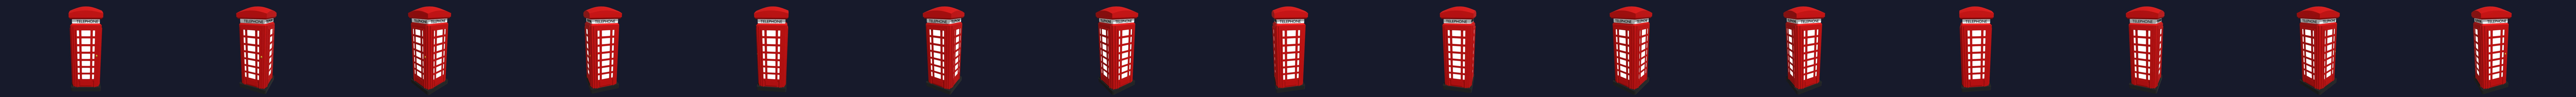 UK Telephone Booth 3D Coin Purse - Celtique Creations